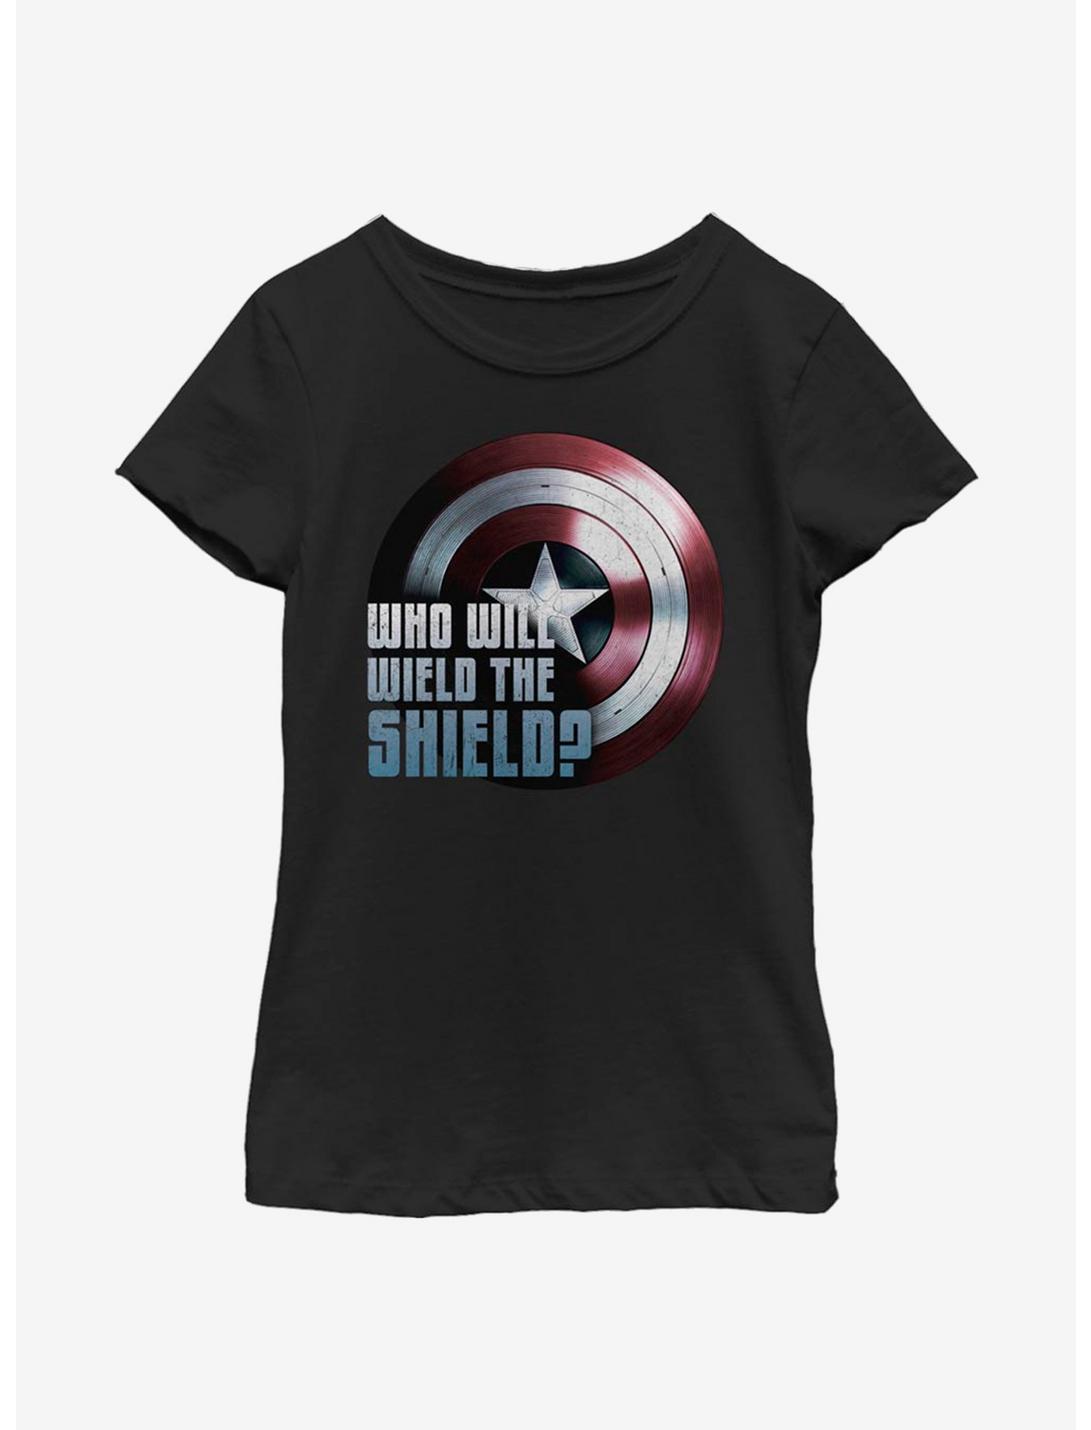 Marvel The Falcon And The Winter Soldier Wielding The Shield Youth Girls T-Shirt, BLACK, hi-res